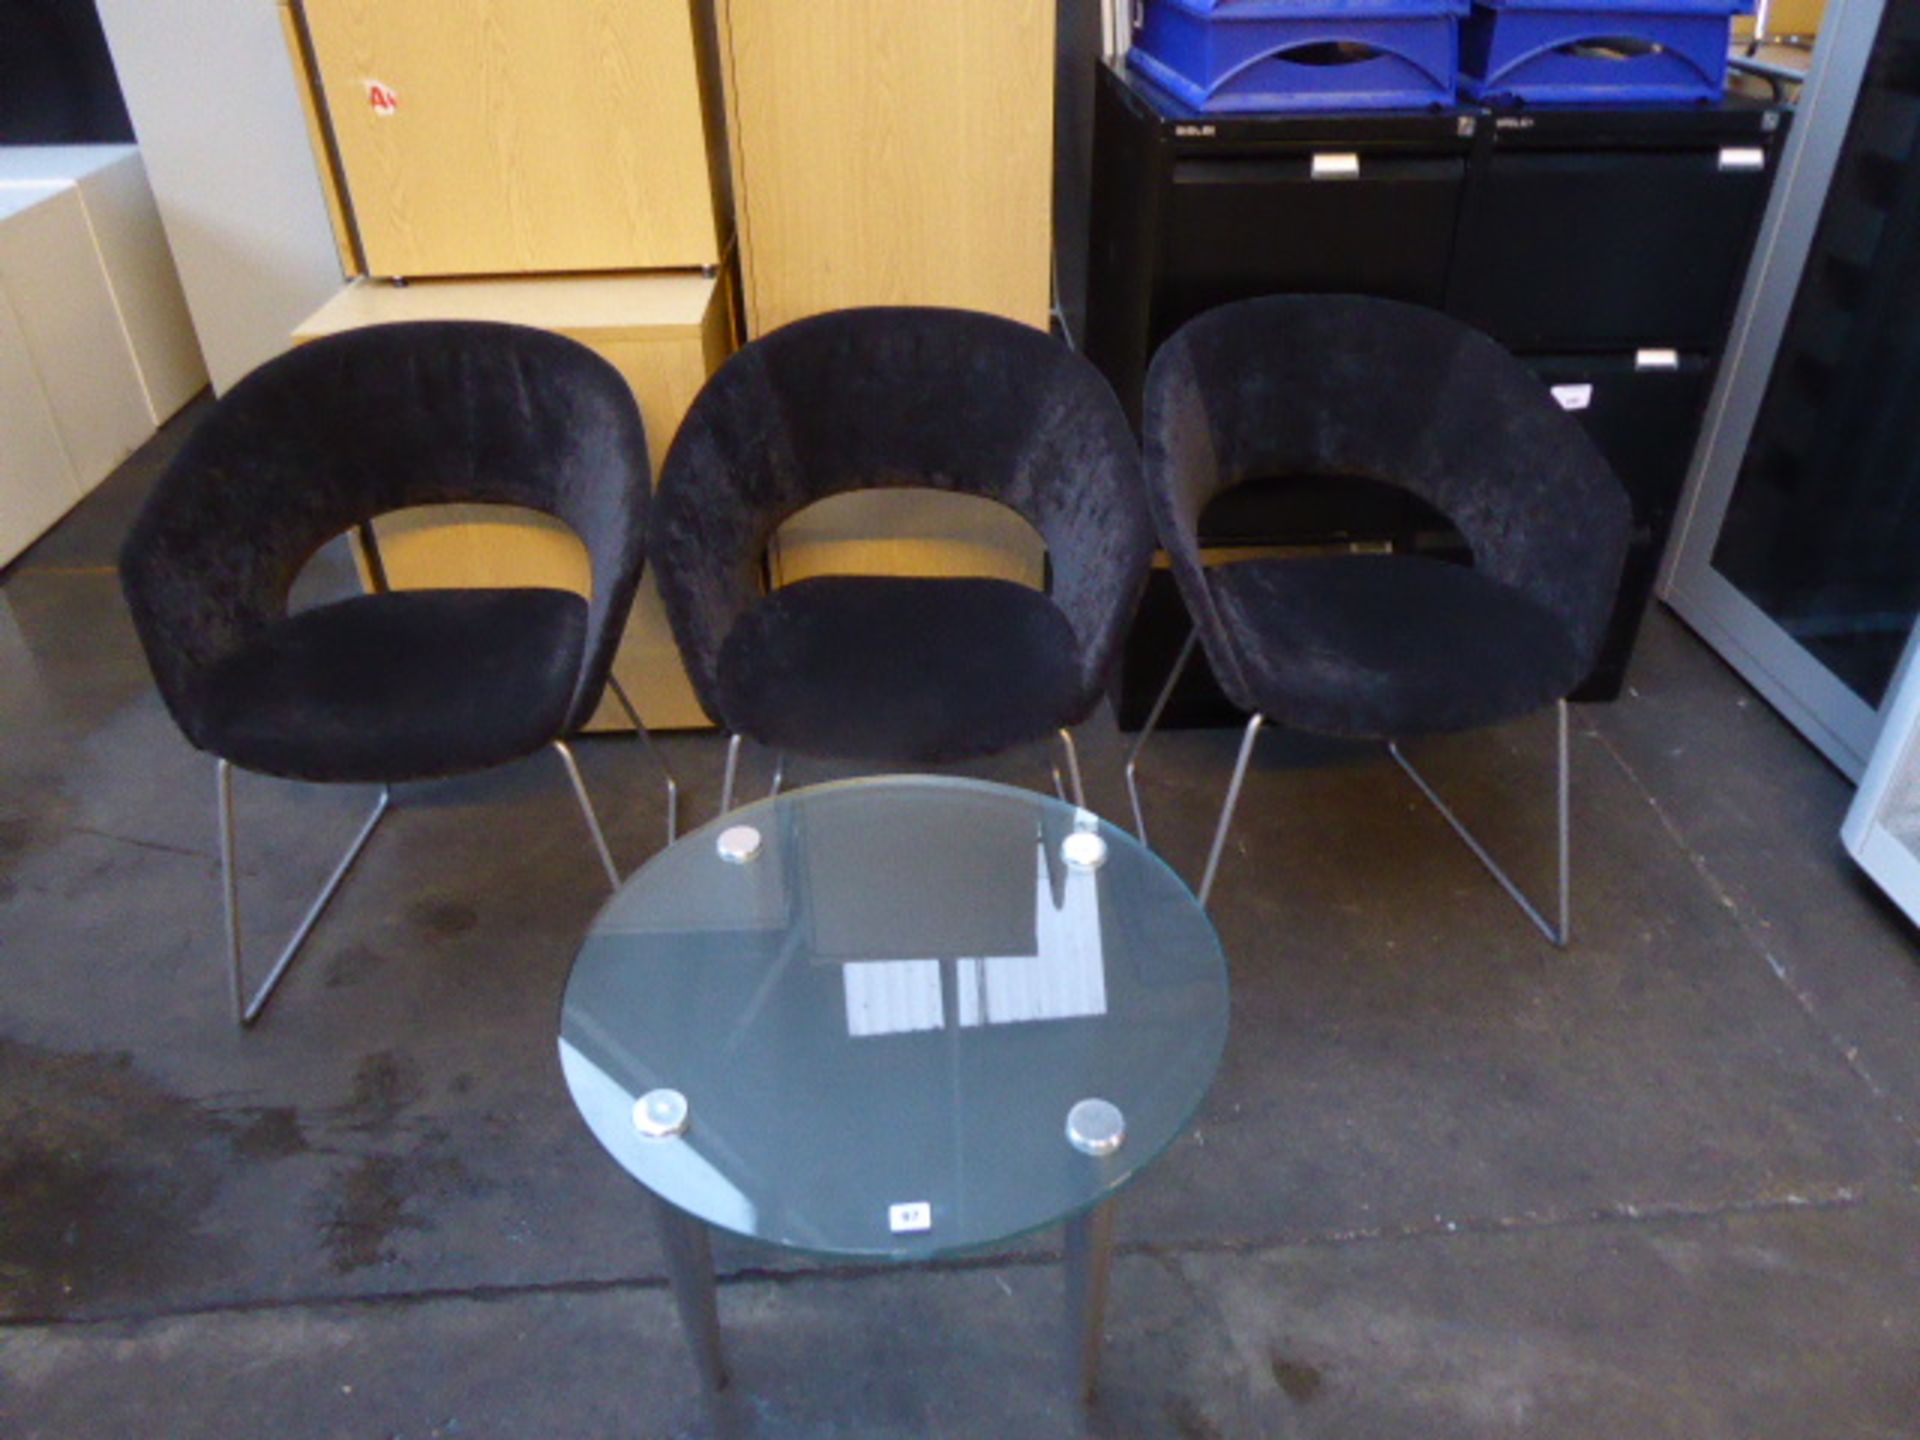 3 Verco black cloth reception chairs and a heavy glass coffee table